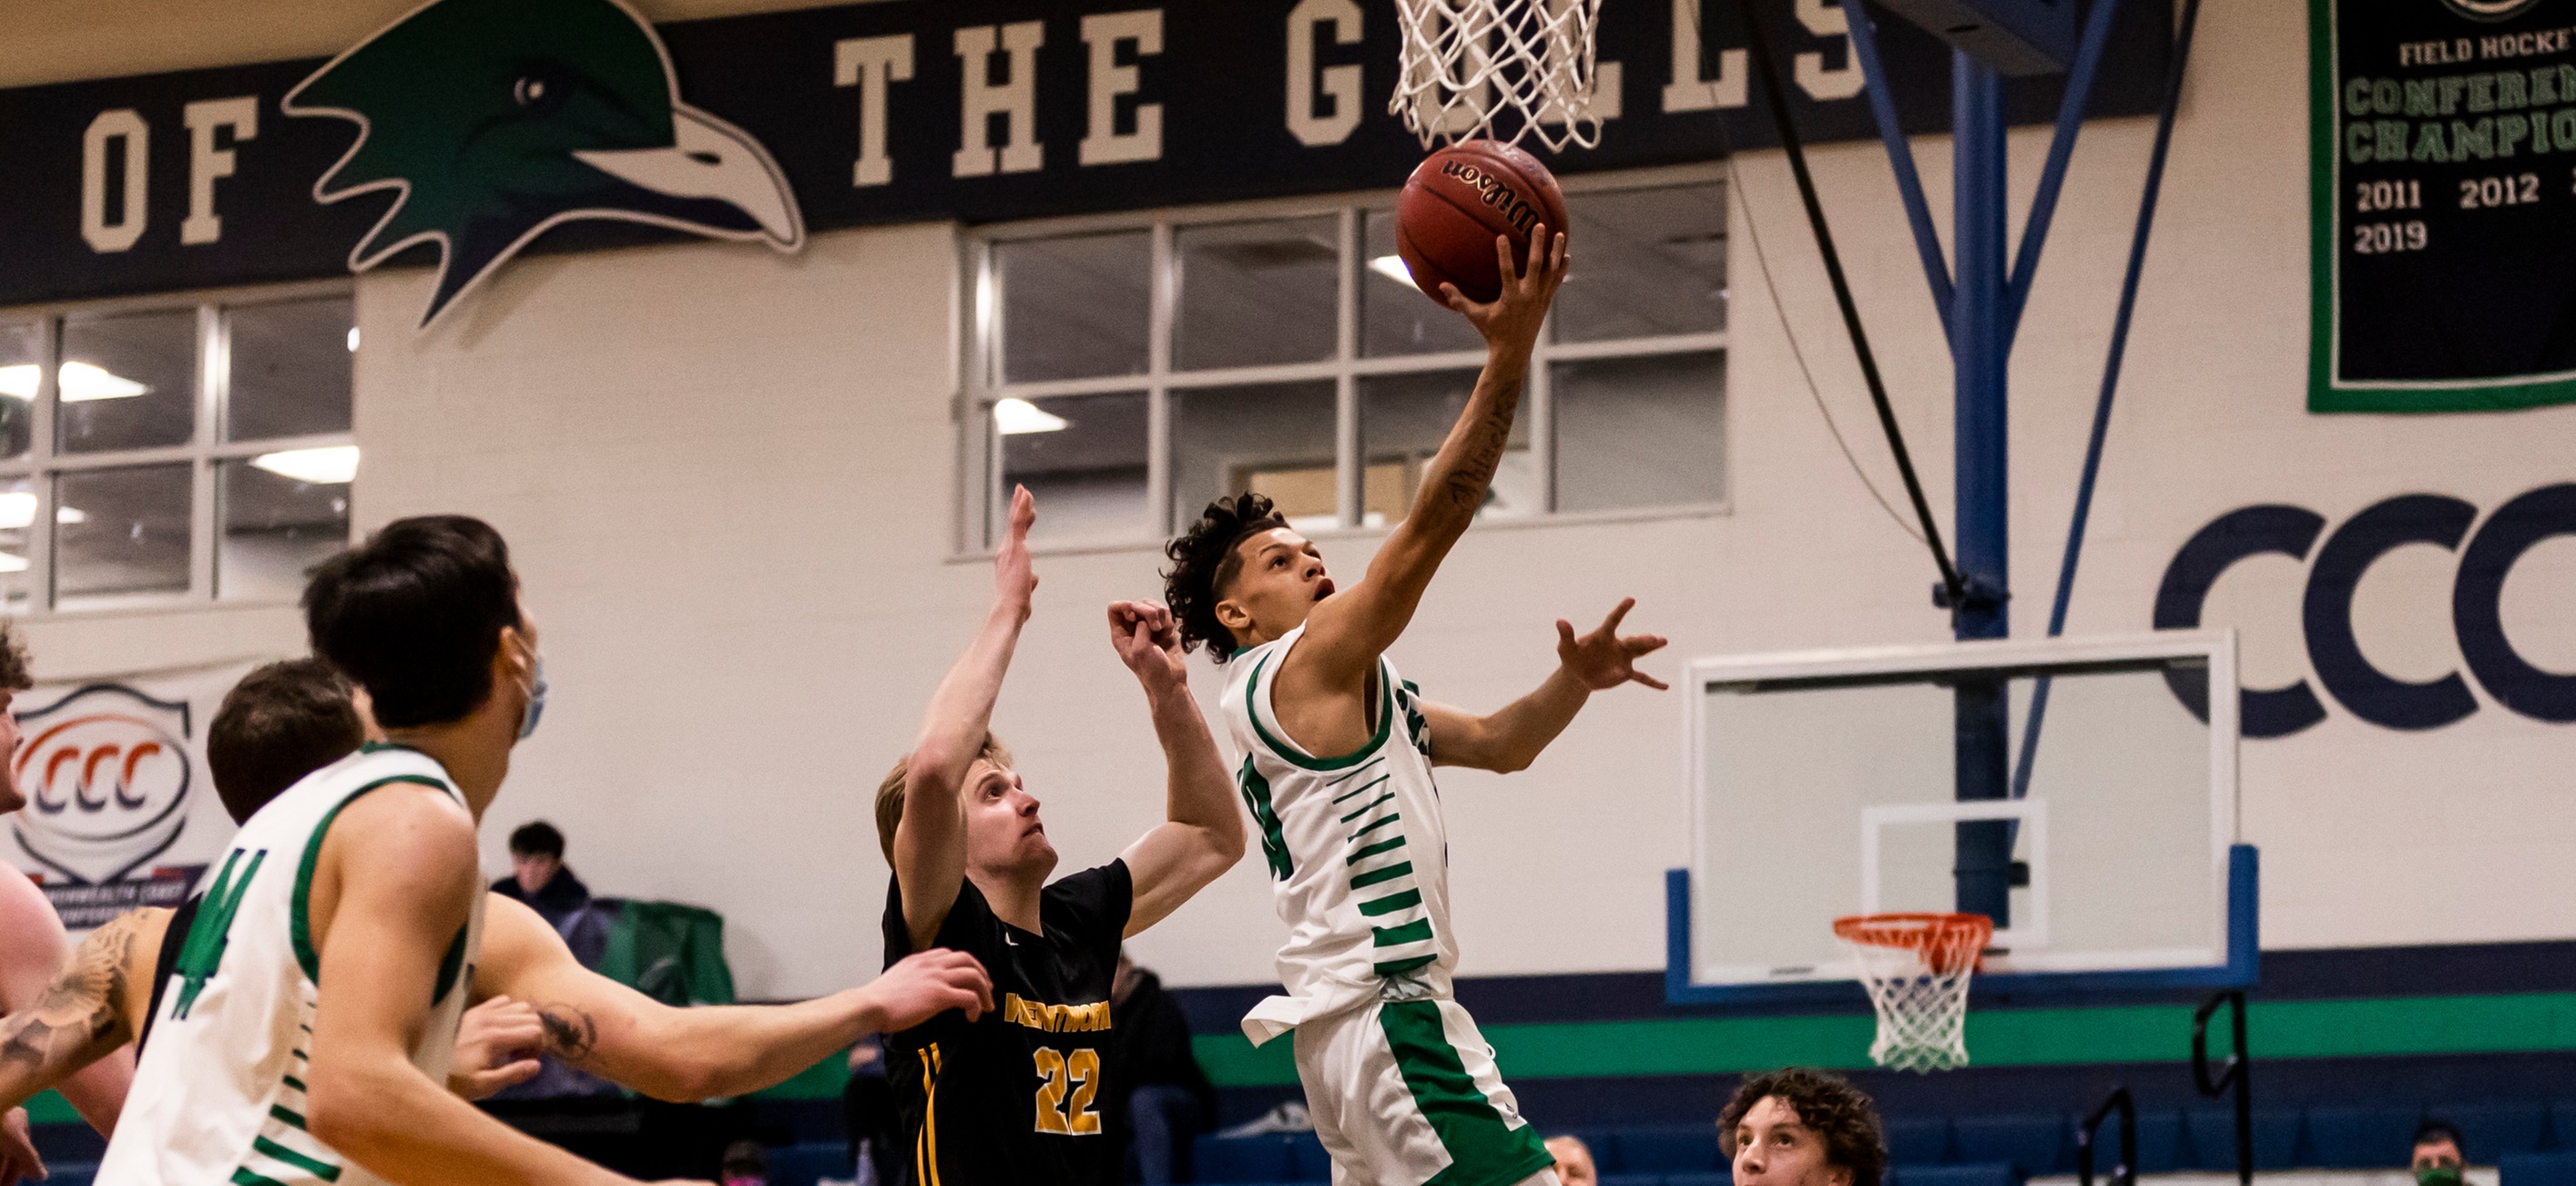 Men’s Basketball Outlasts Wentworth, 76-68